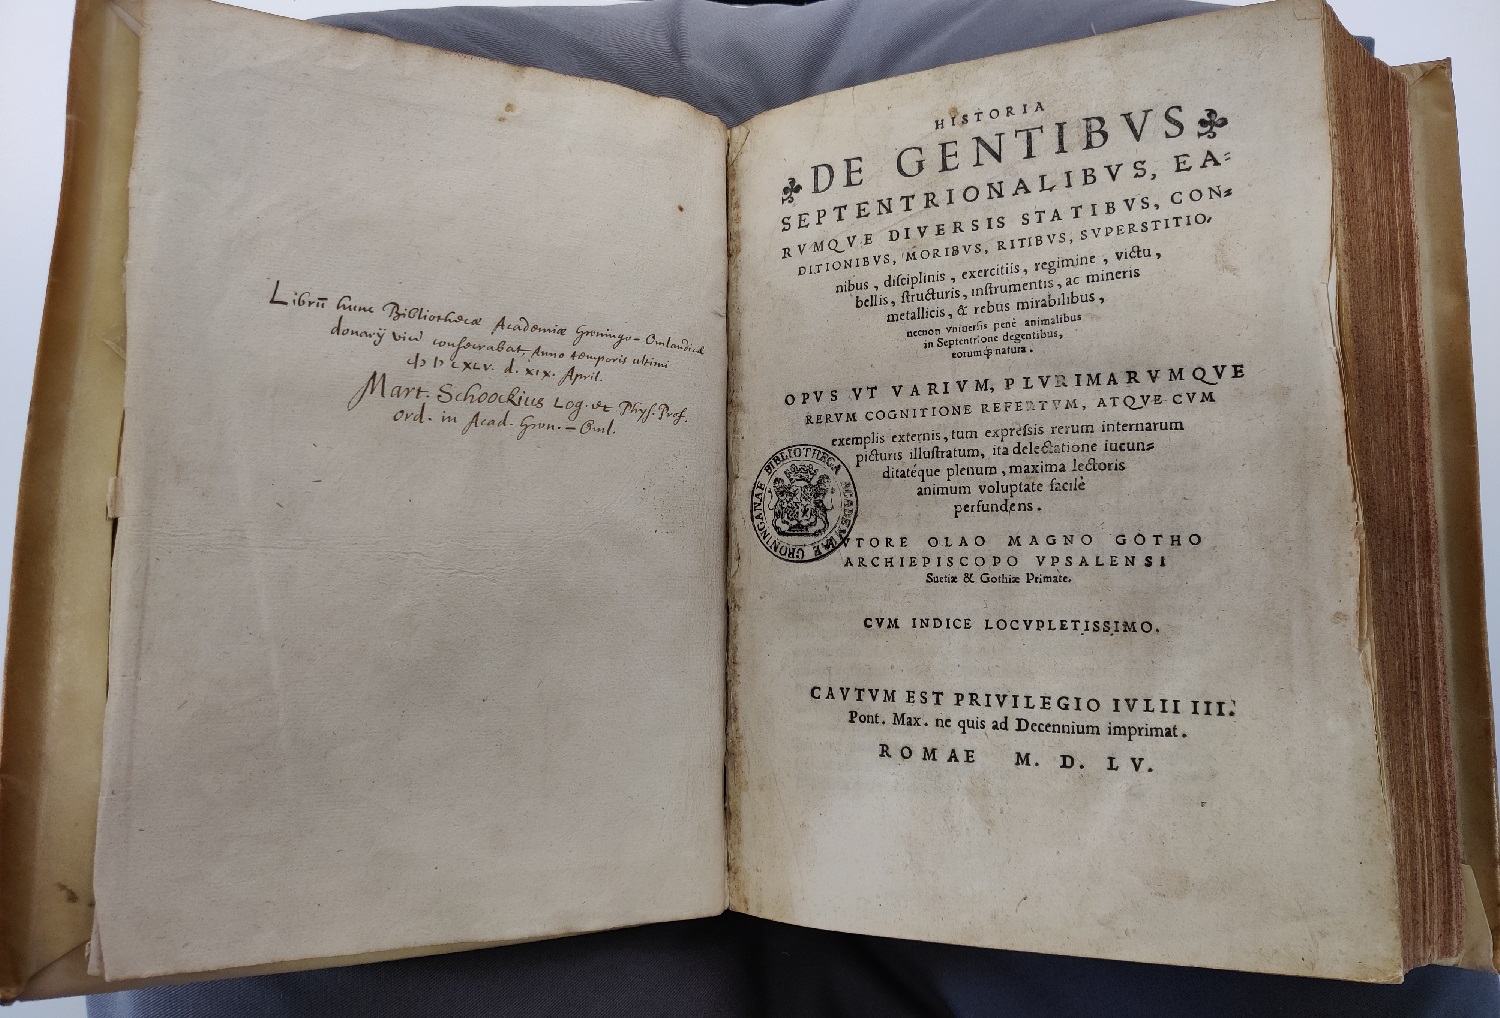 Image 2: Front fly leaf with an inscription about the donation of the book to the University of Groningen Library, and the title page of the Historia De Gentibus Septentrionalibus